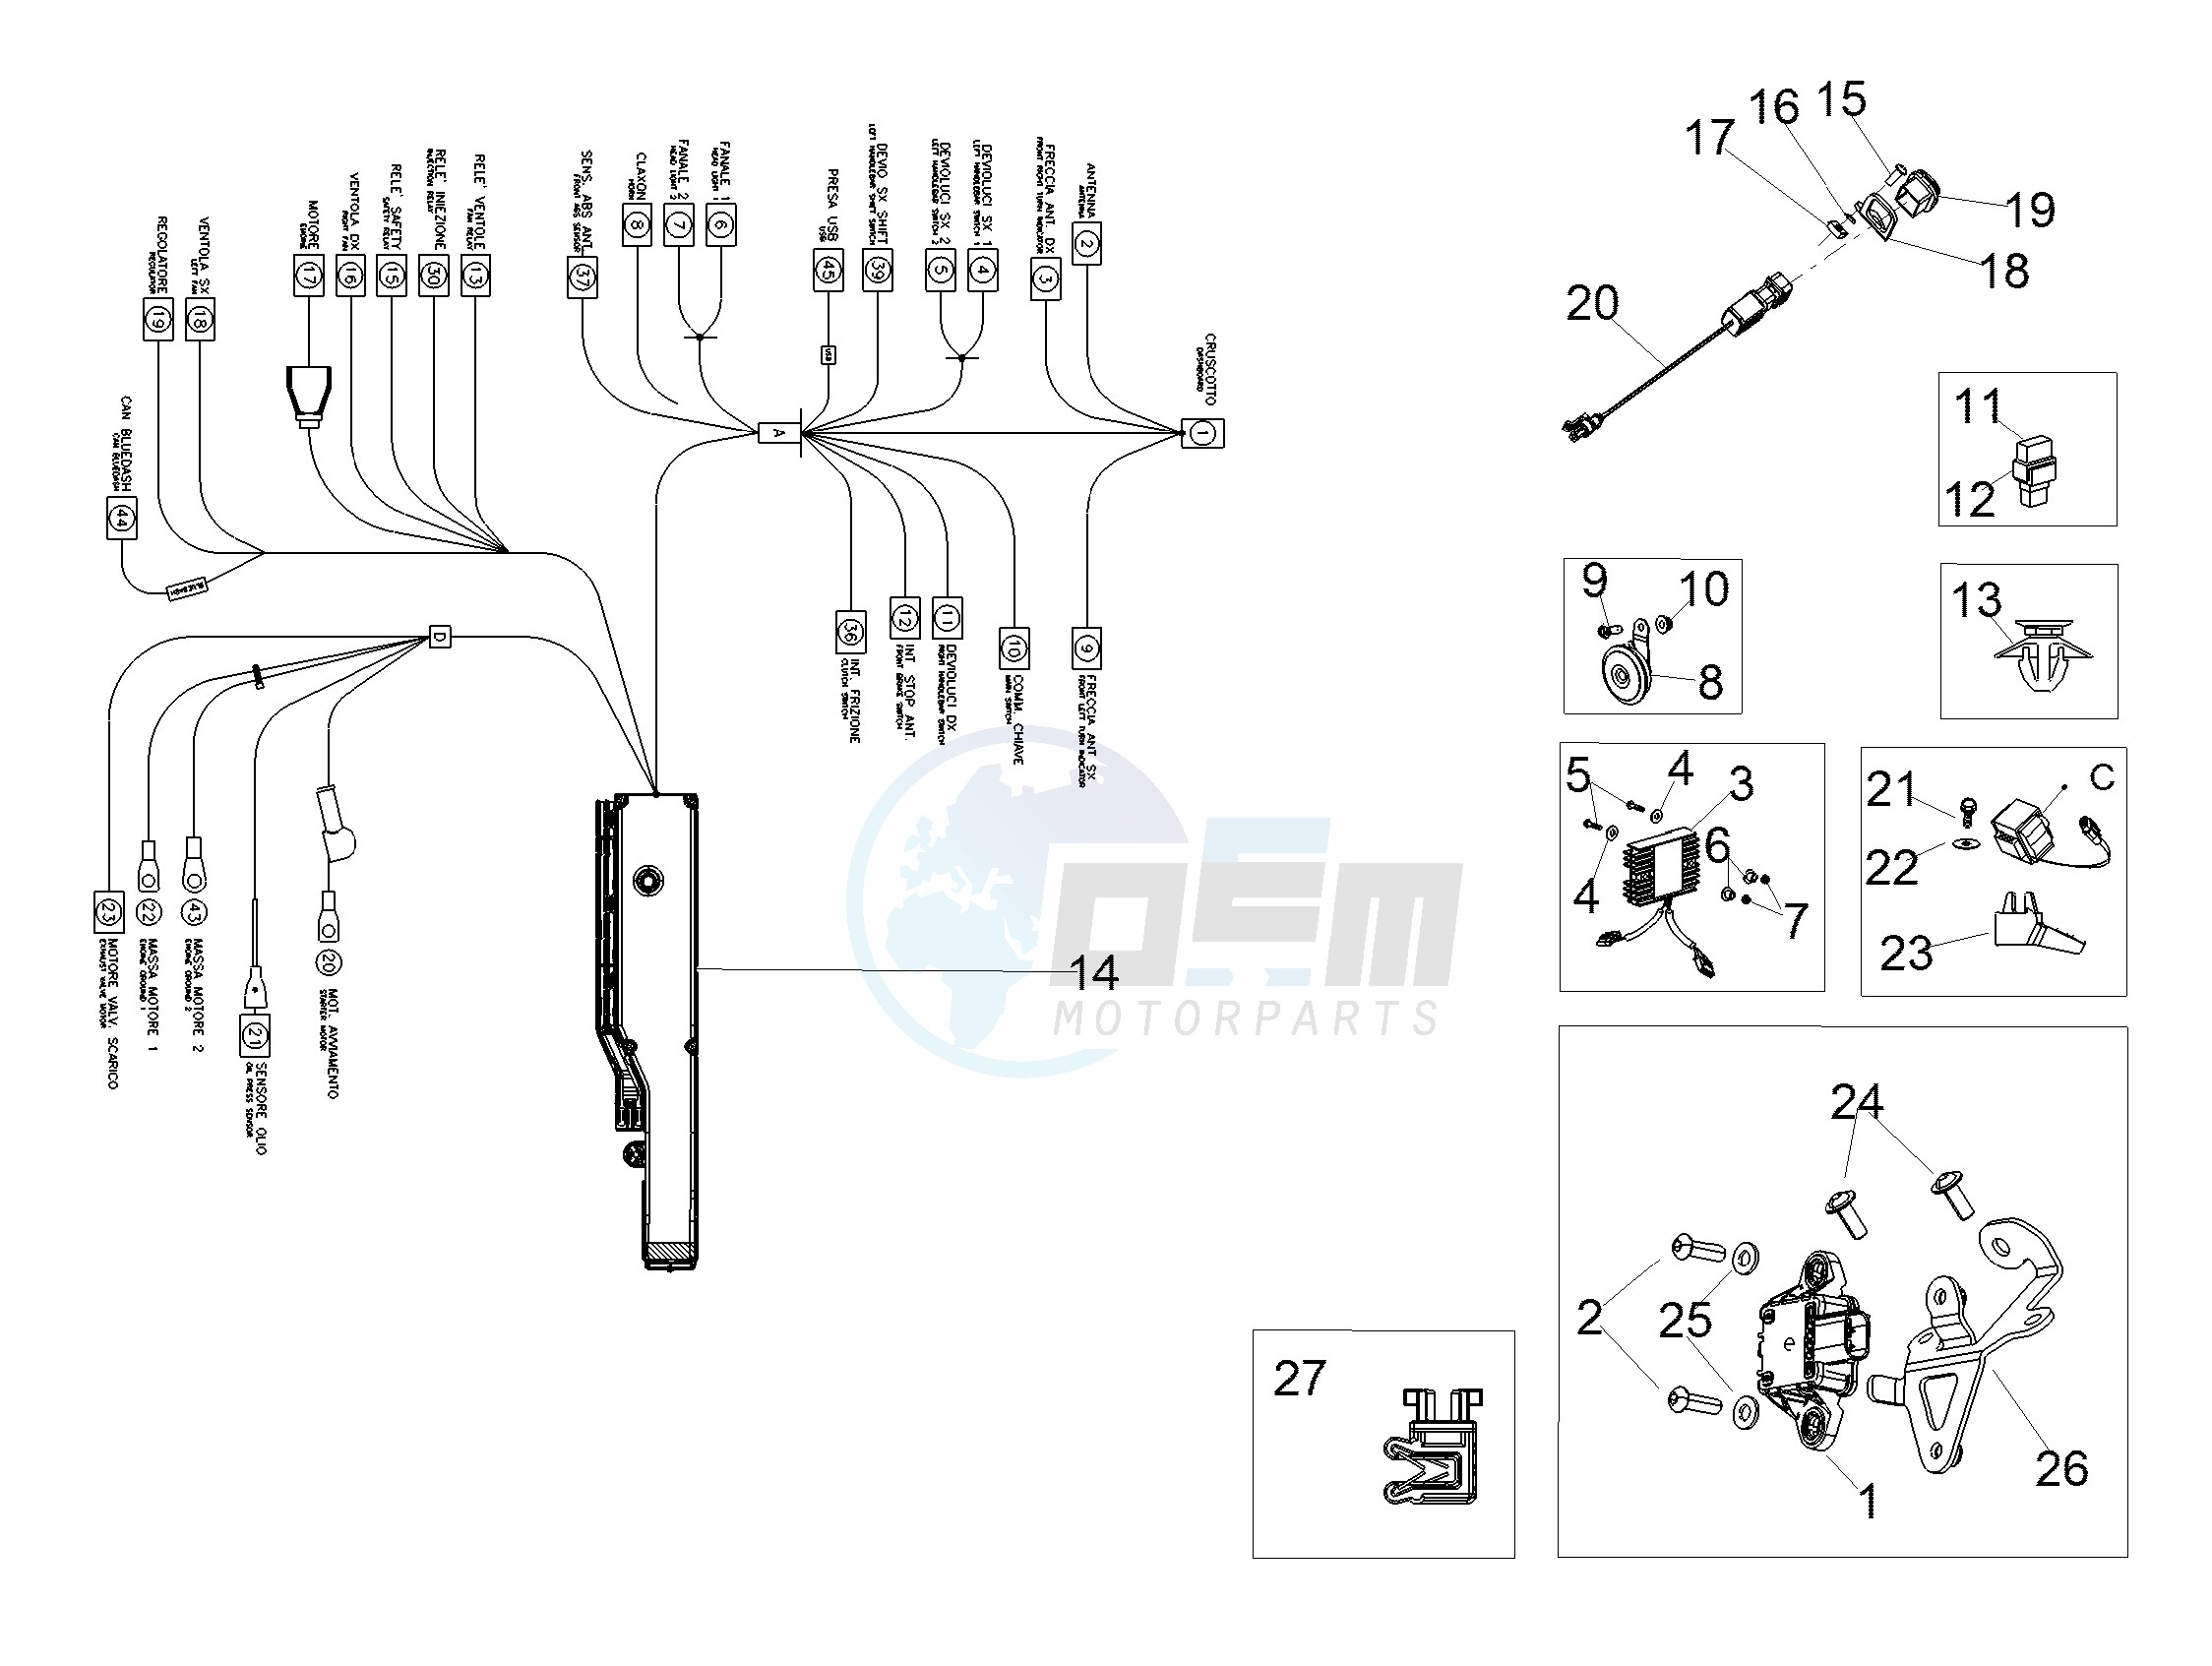 Front electrical system blueprint